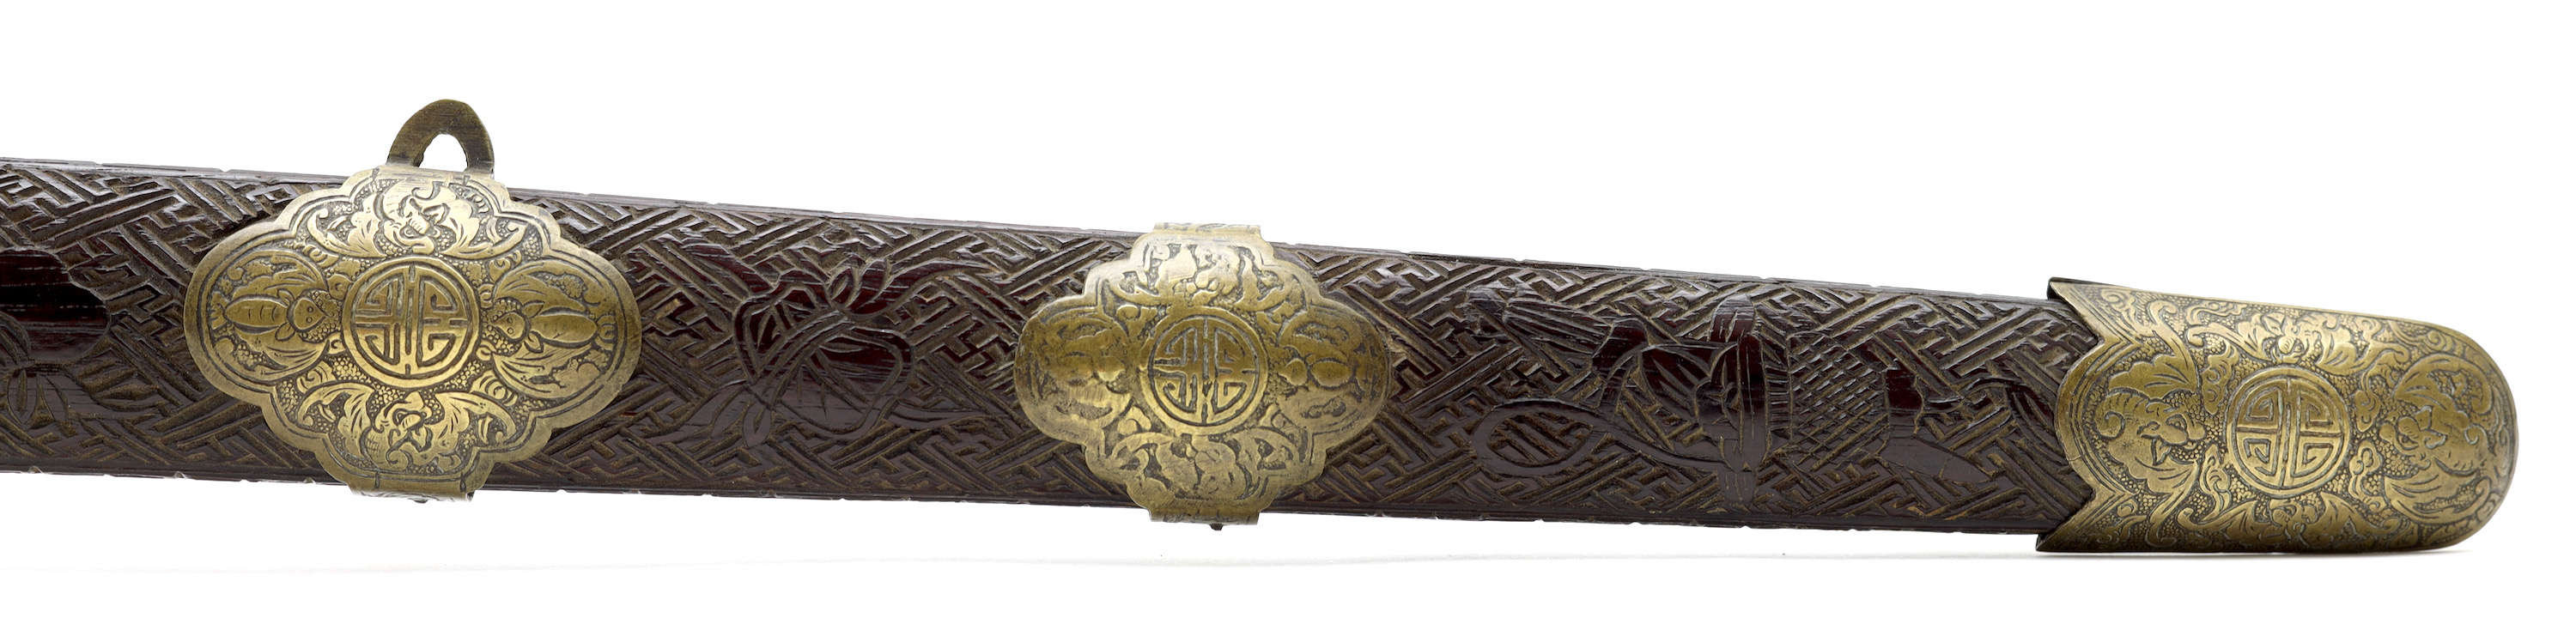 Double duanjian with carved hardwood scabbard